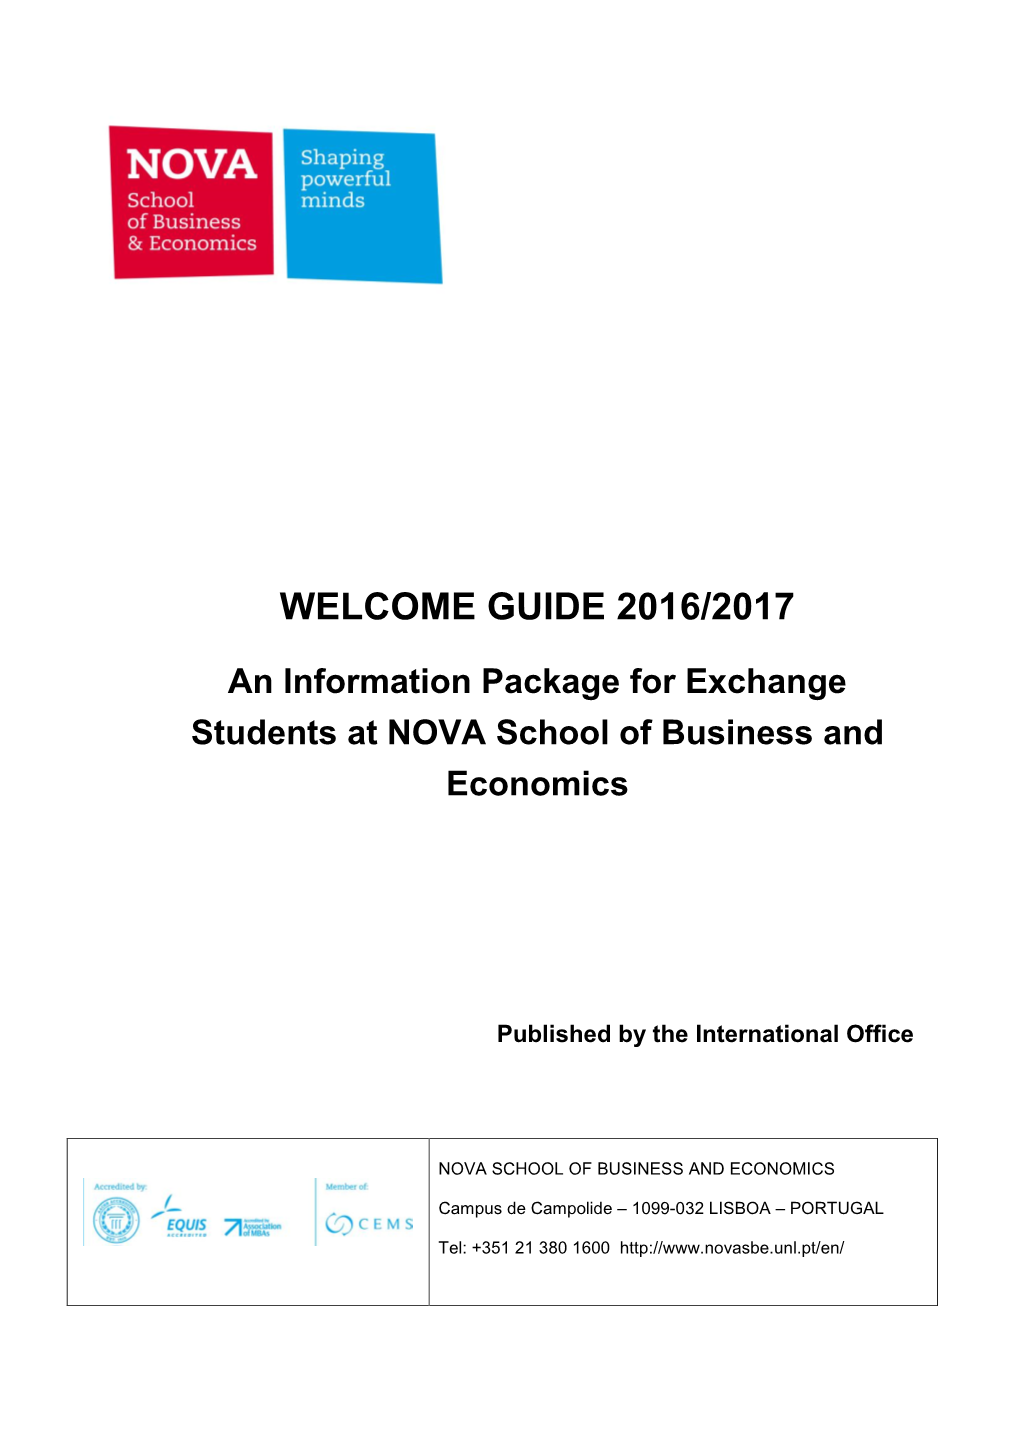 WELCOME GUIDE 2016/2017 an Information Package for Exchange